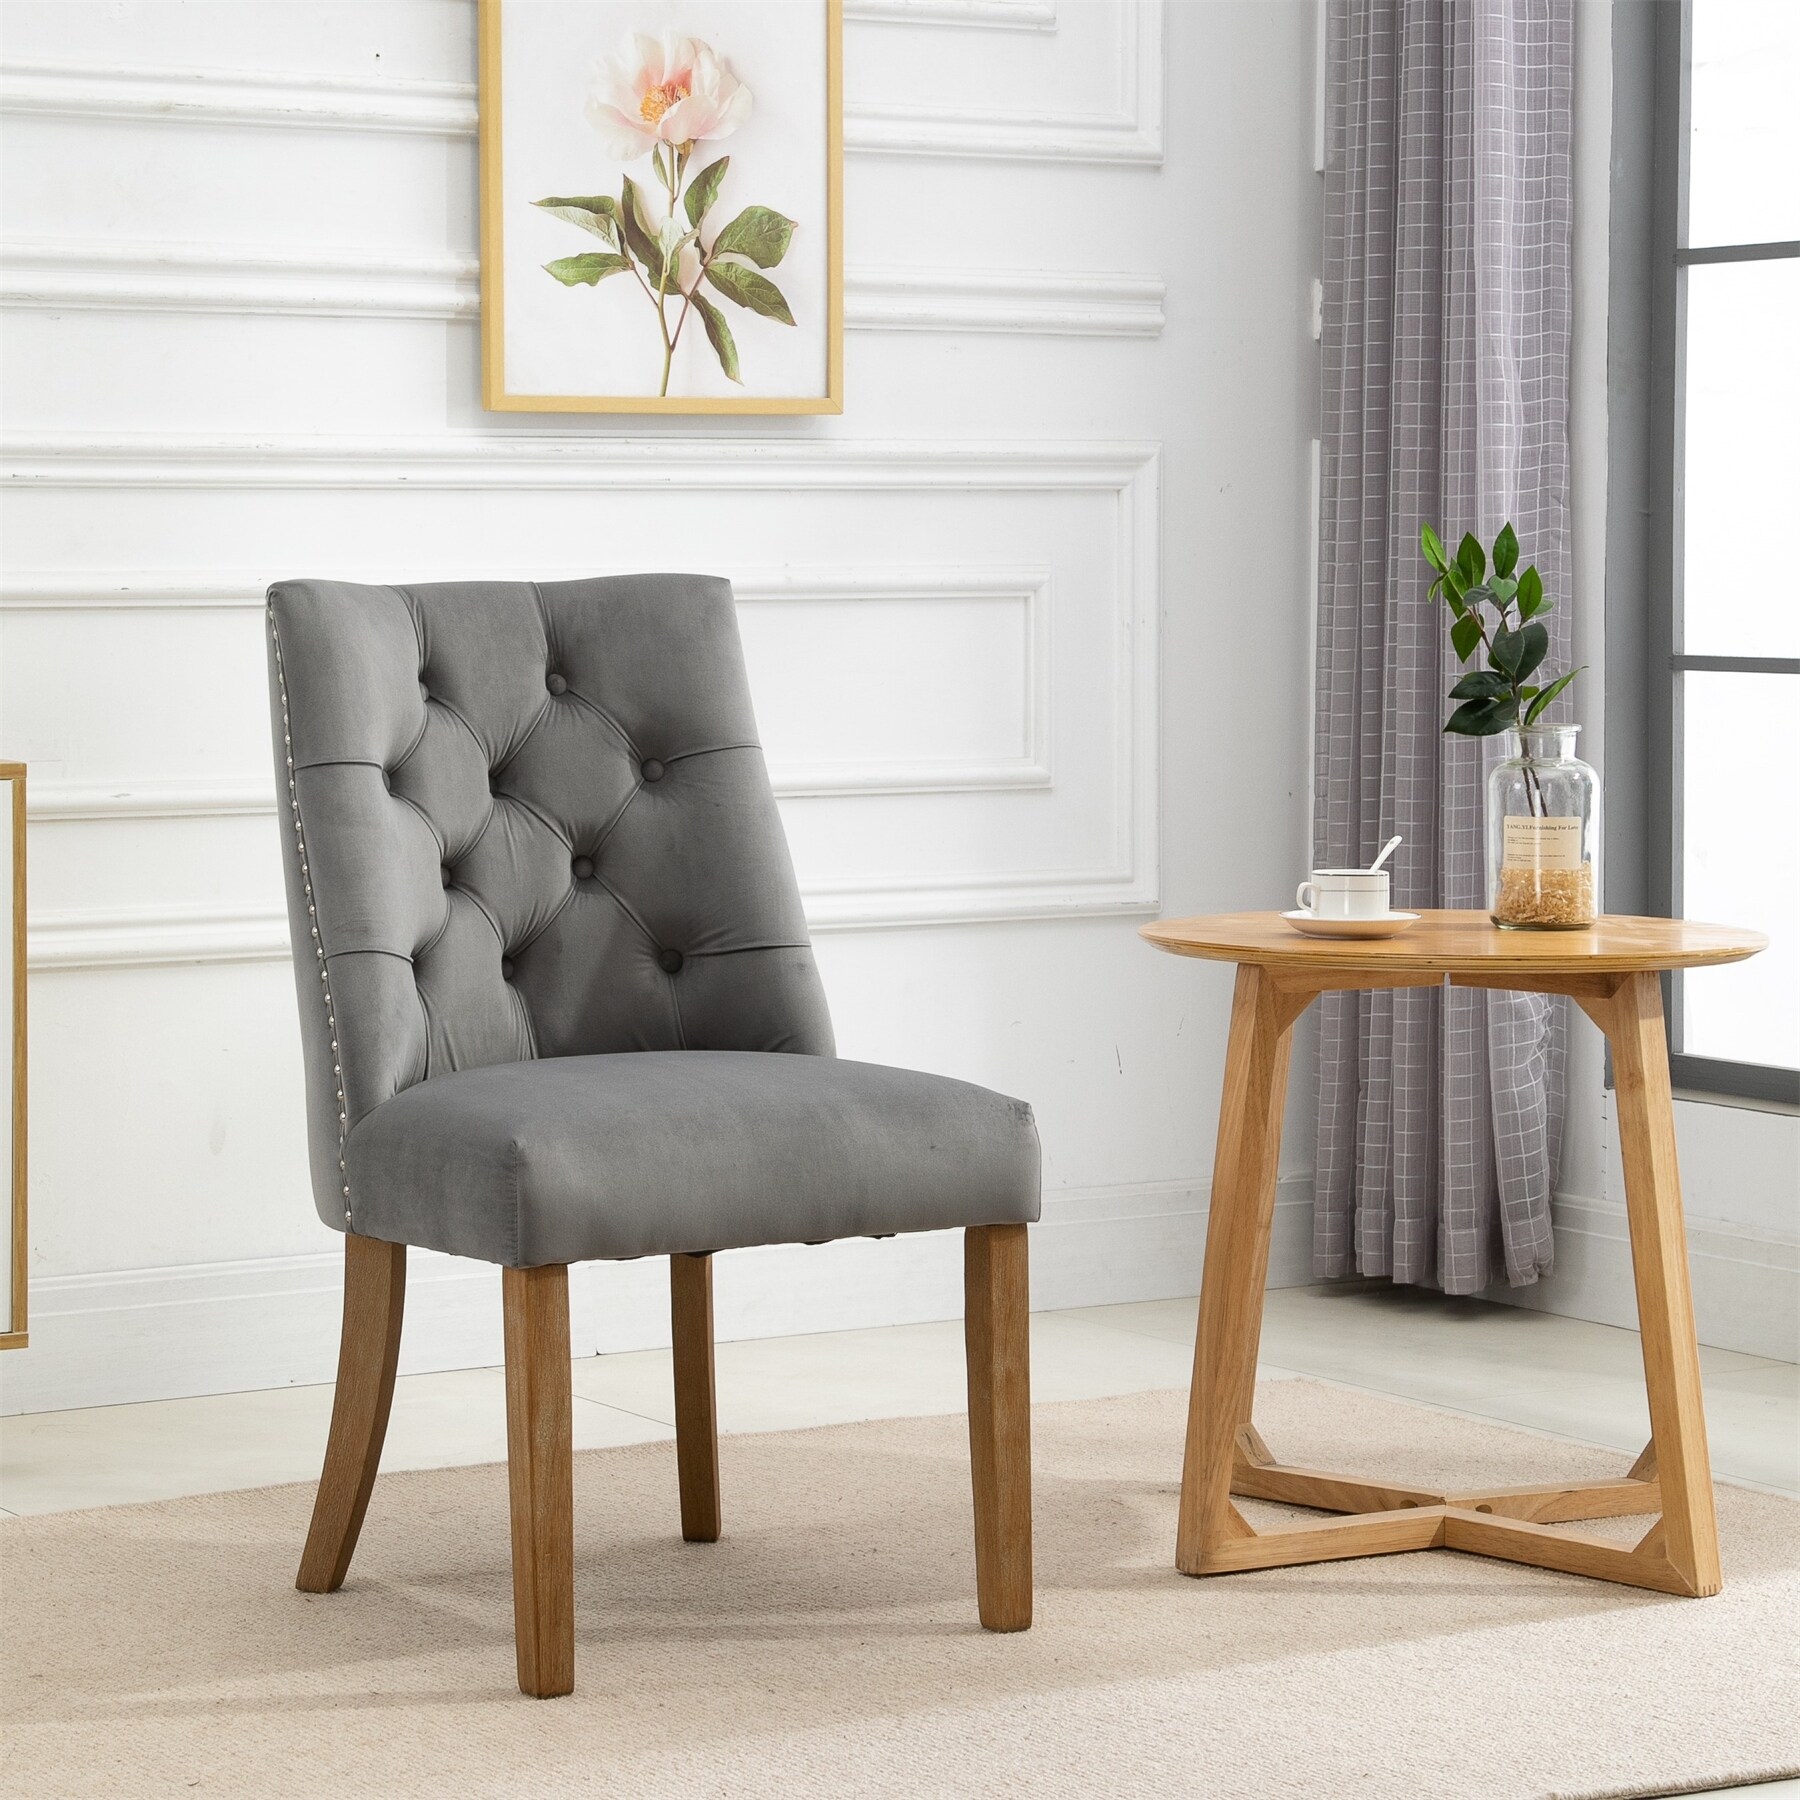 Set of 2 Cream Color Upholstered Button Tufted Back Fabric Dining Modern Arm  Chair With Padded Seat Solid Wood Legs - Bed Bath & Beyond - 29833766